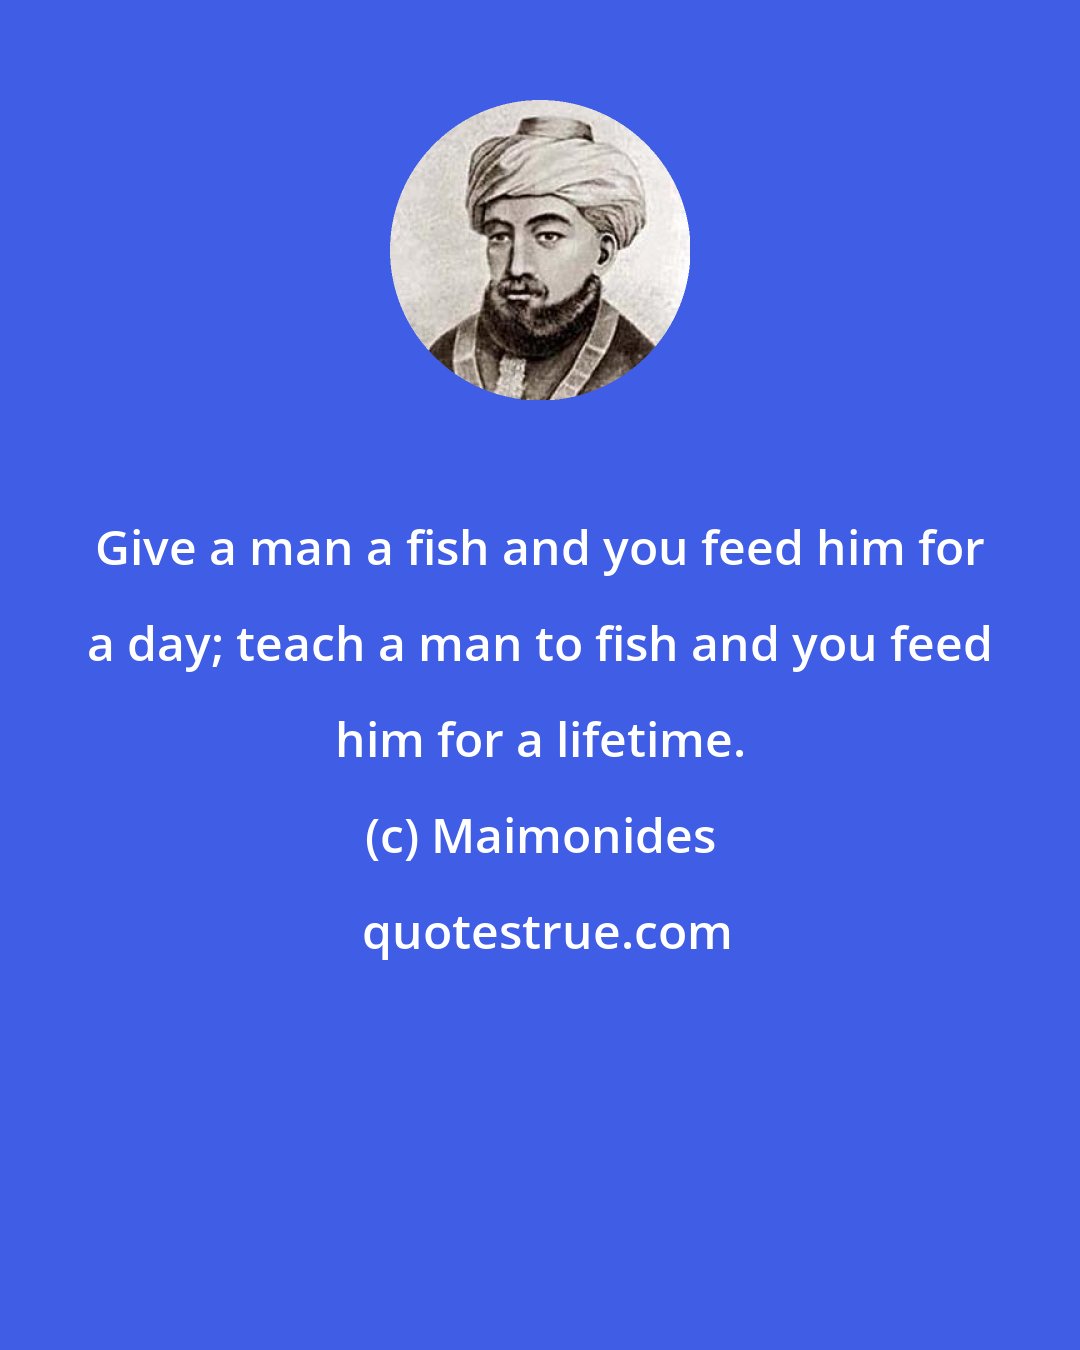 Maimonides: Give a man a fish and you feed him for a day; teach a man to fish and you feed him for a lifetime.